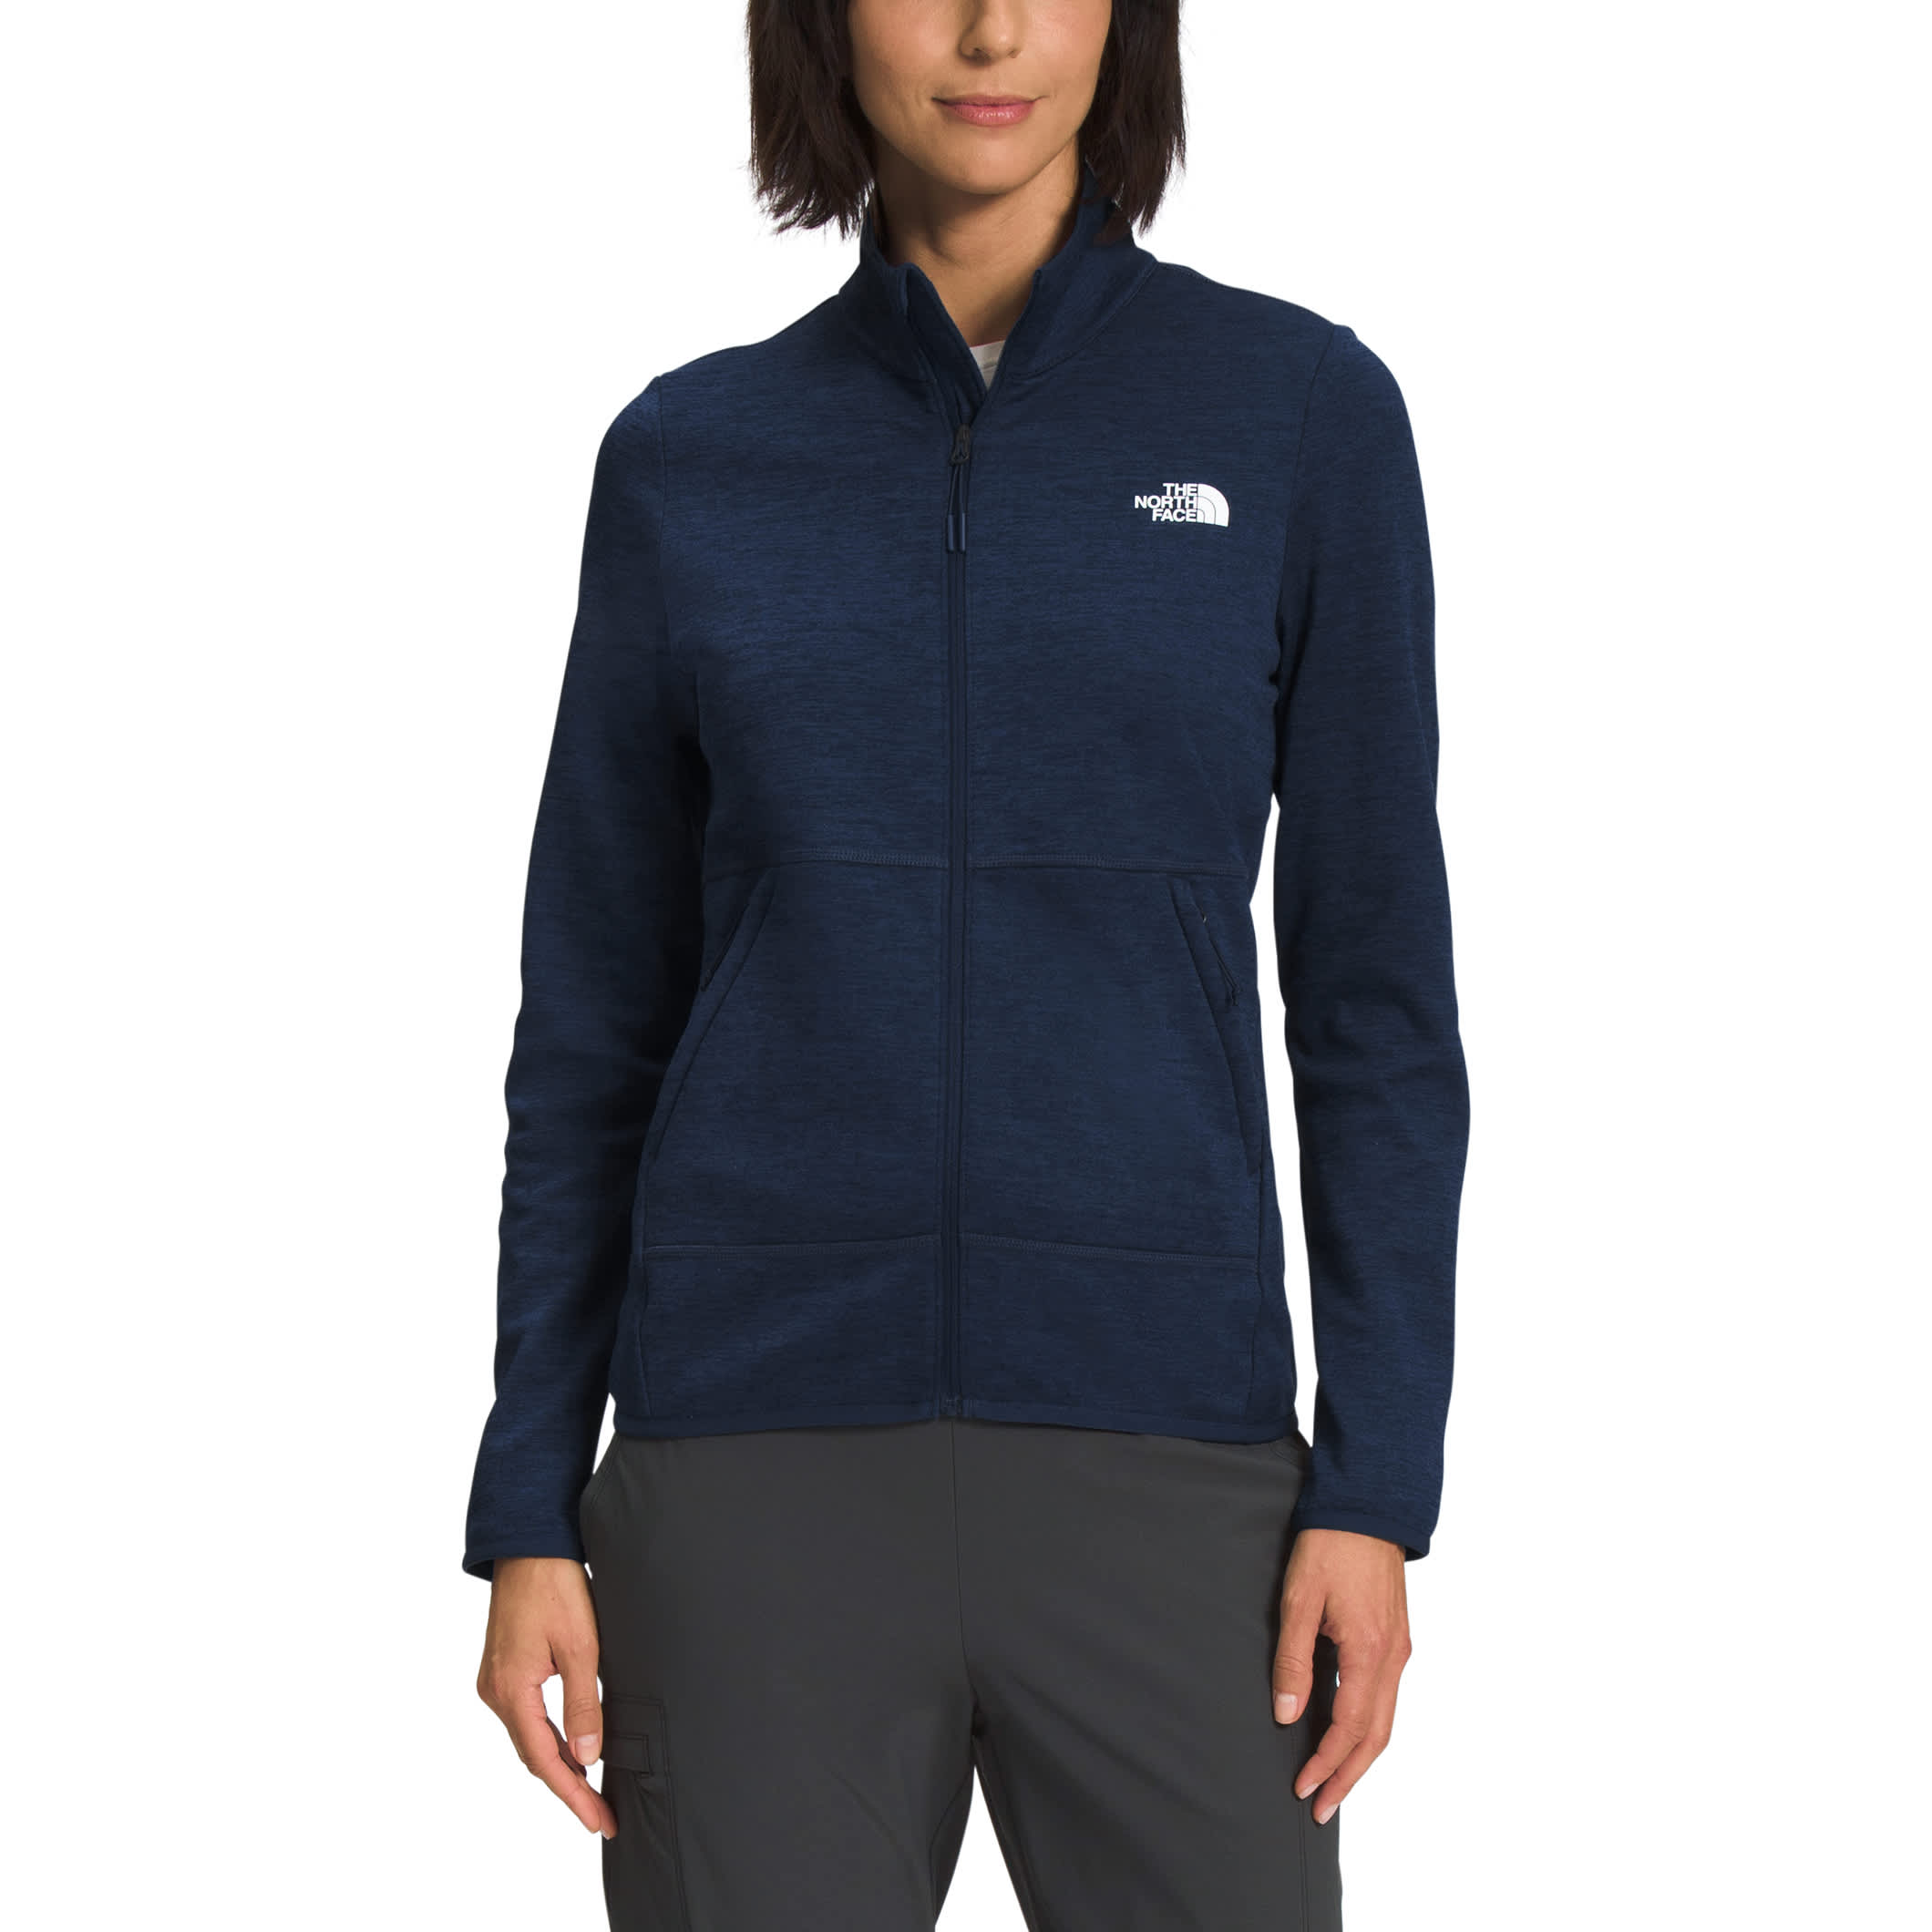 The North Face® Women’s Canyonlands Full-Zip Jacket